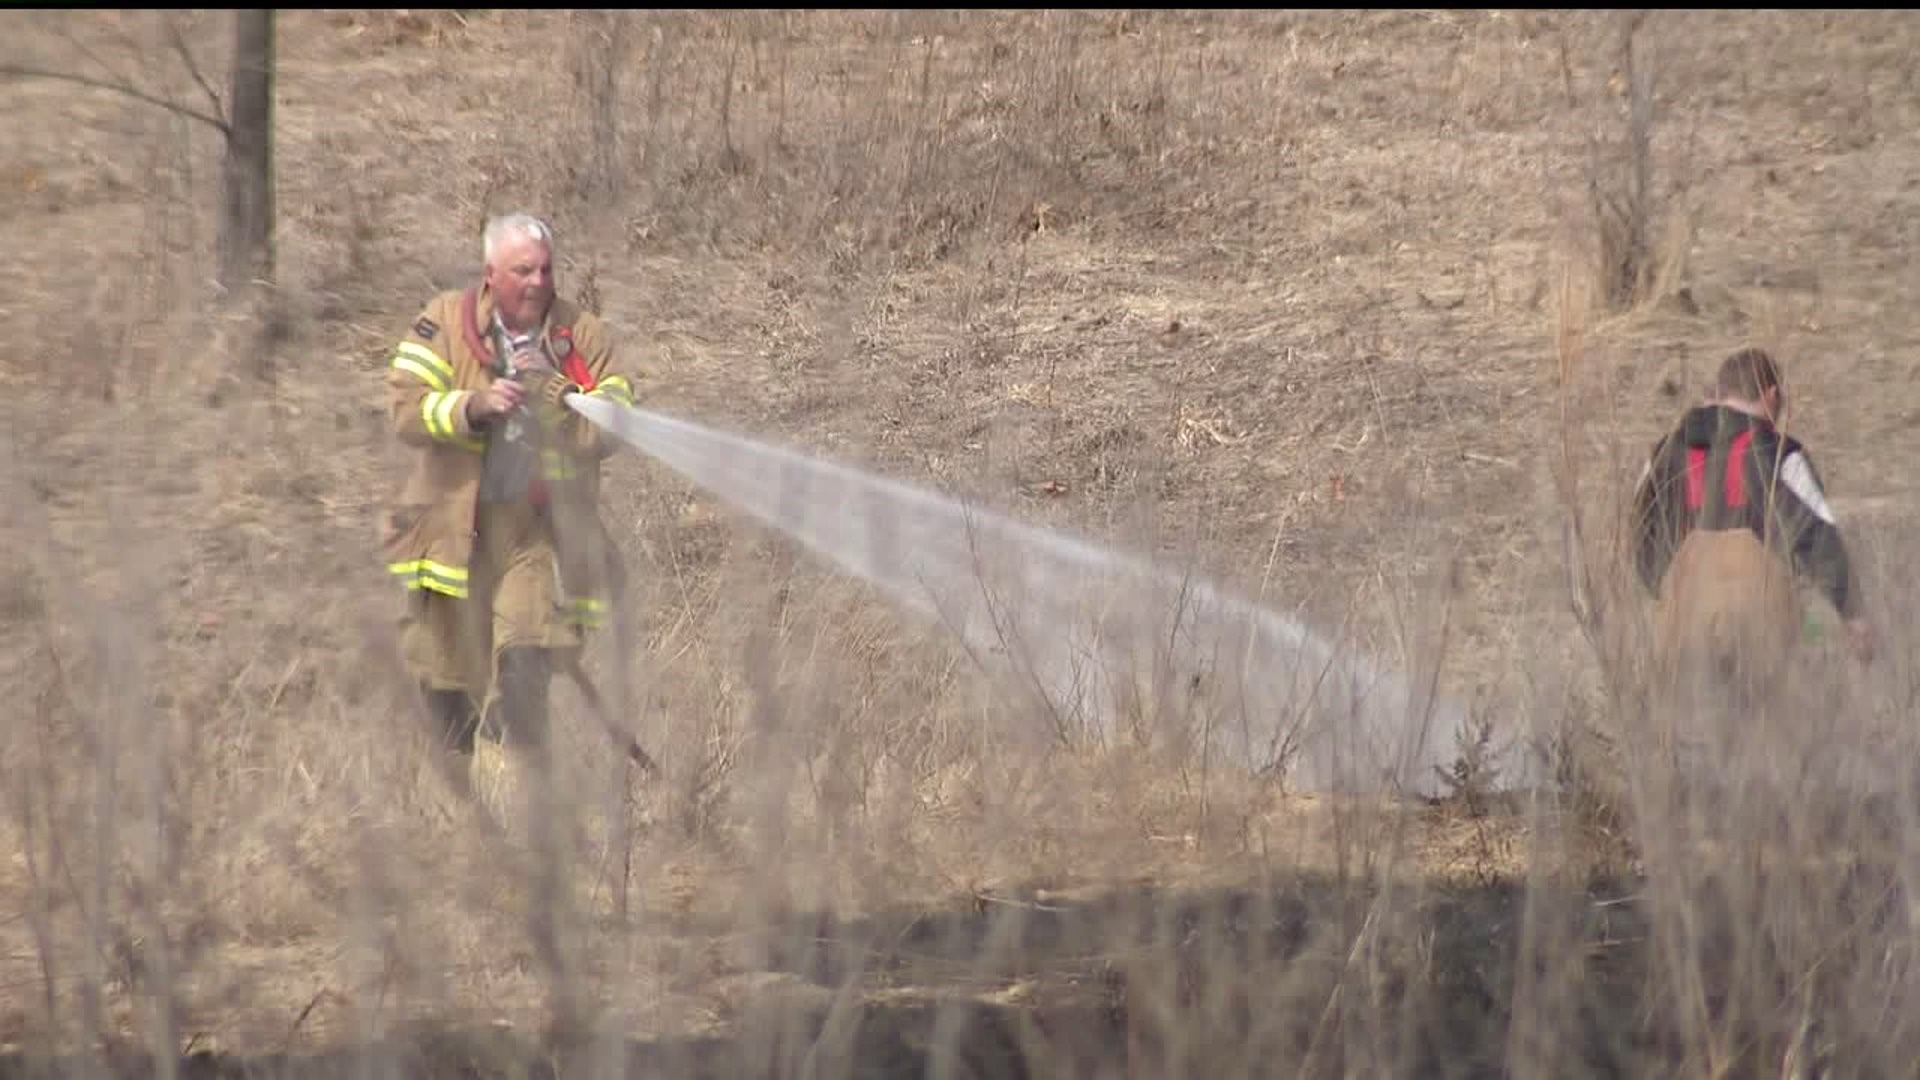 Firefighters contain brush fire